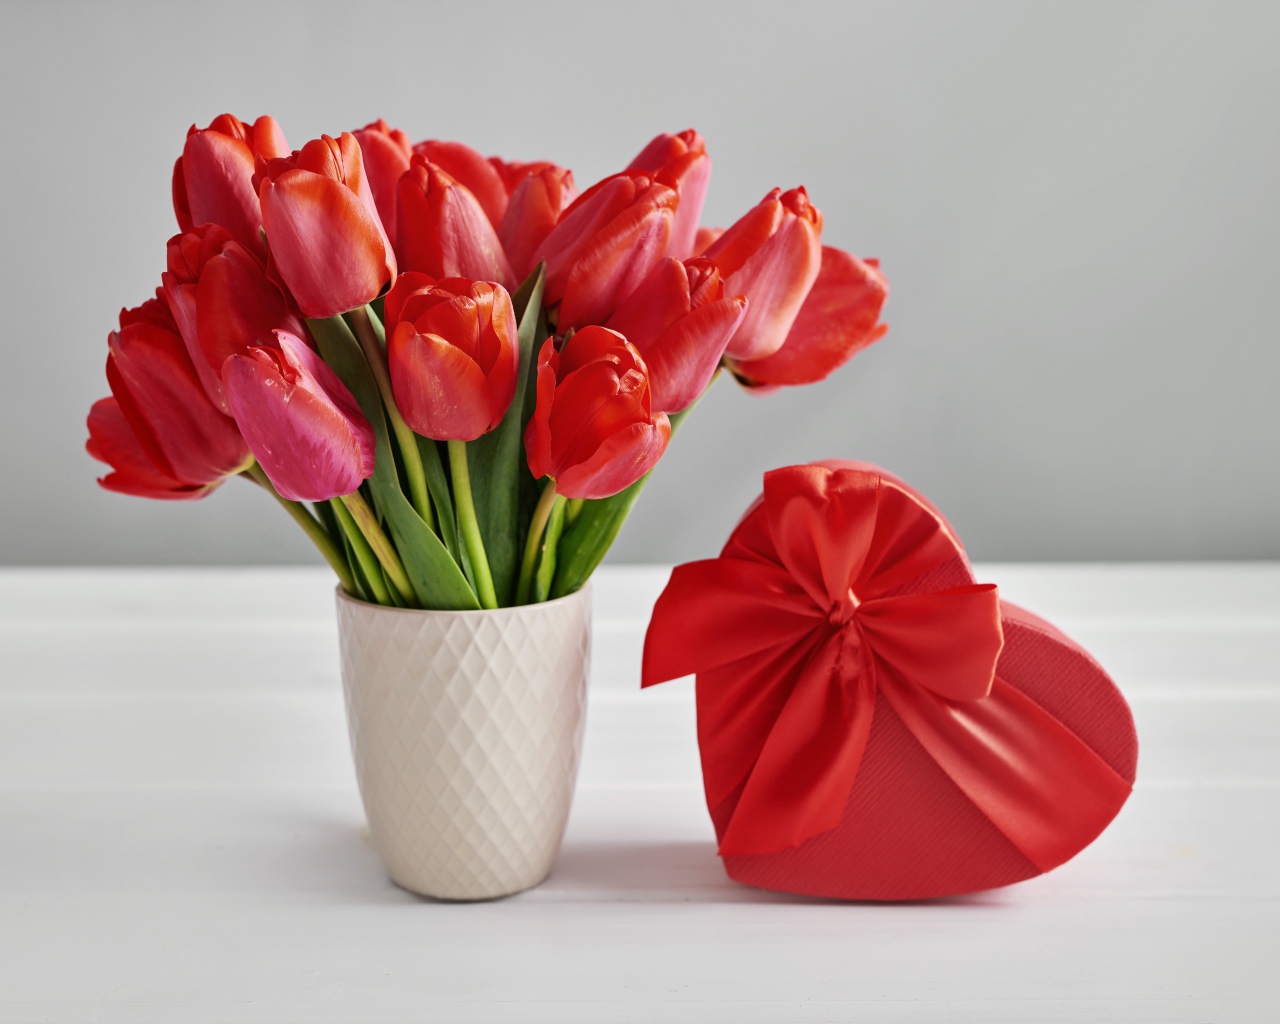 Bouquet of red tulips on a table with a heart-shaped box